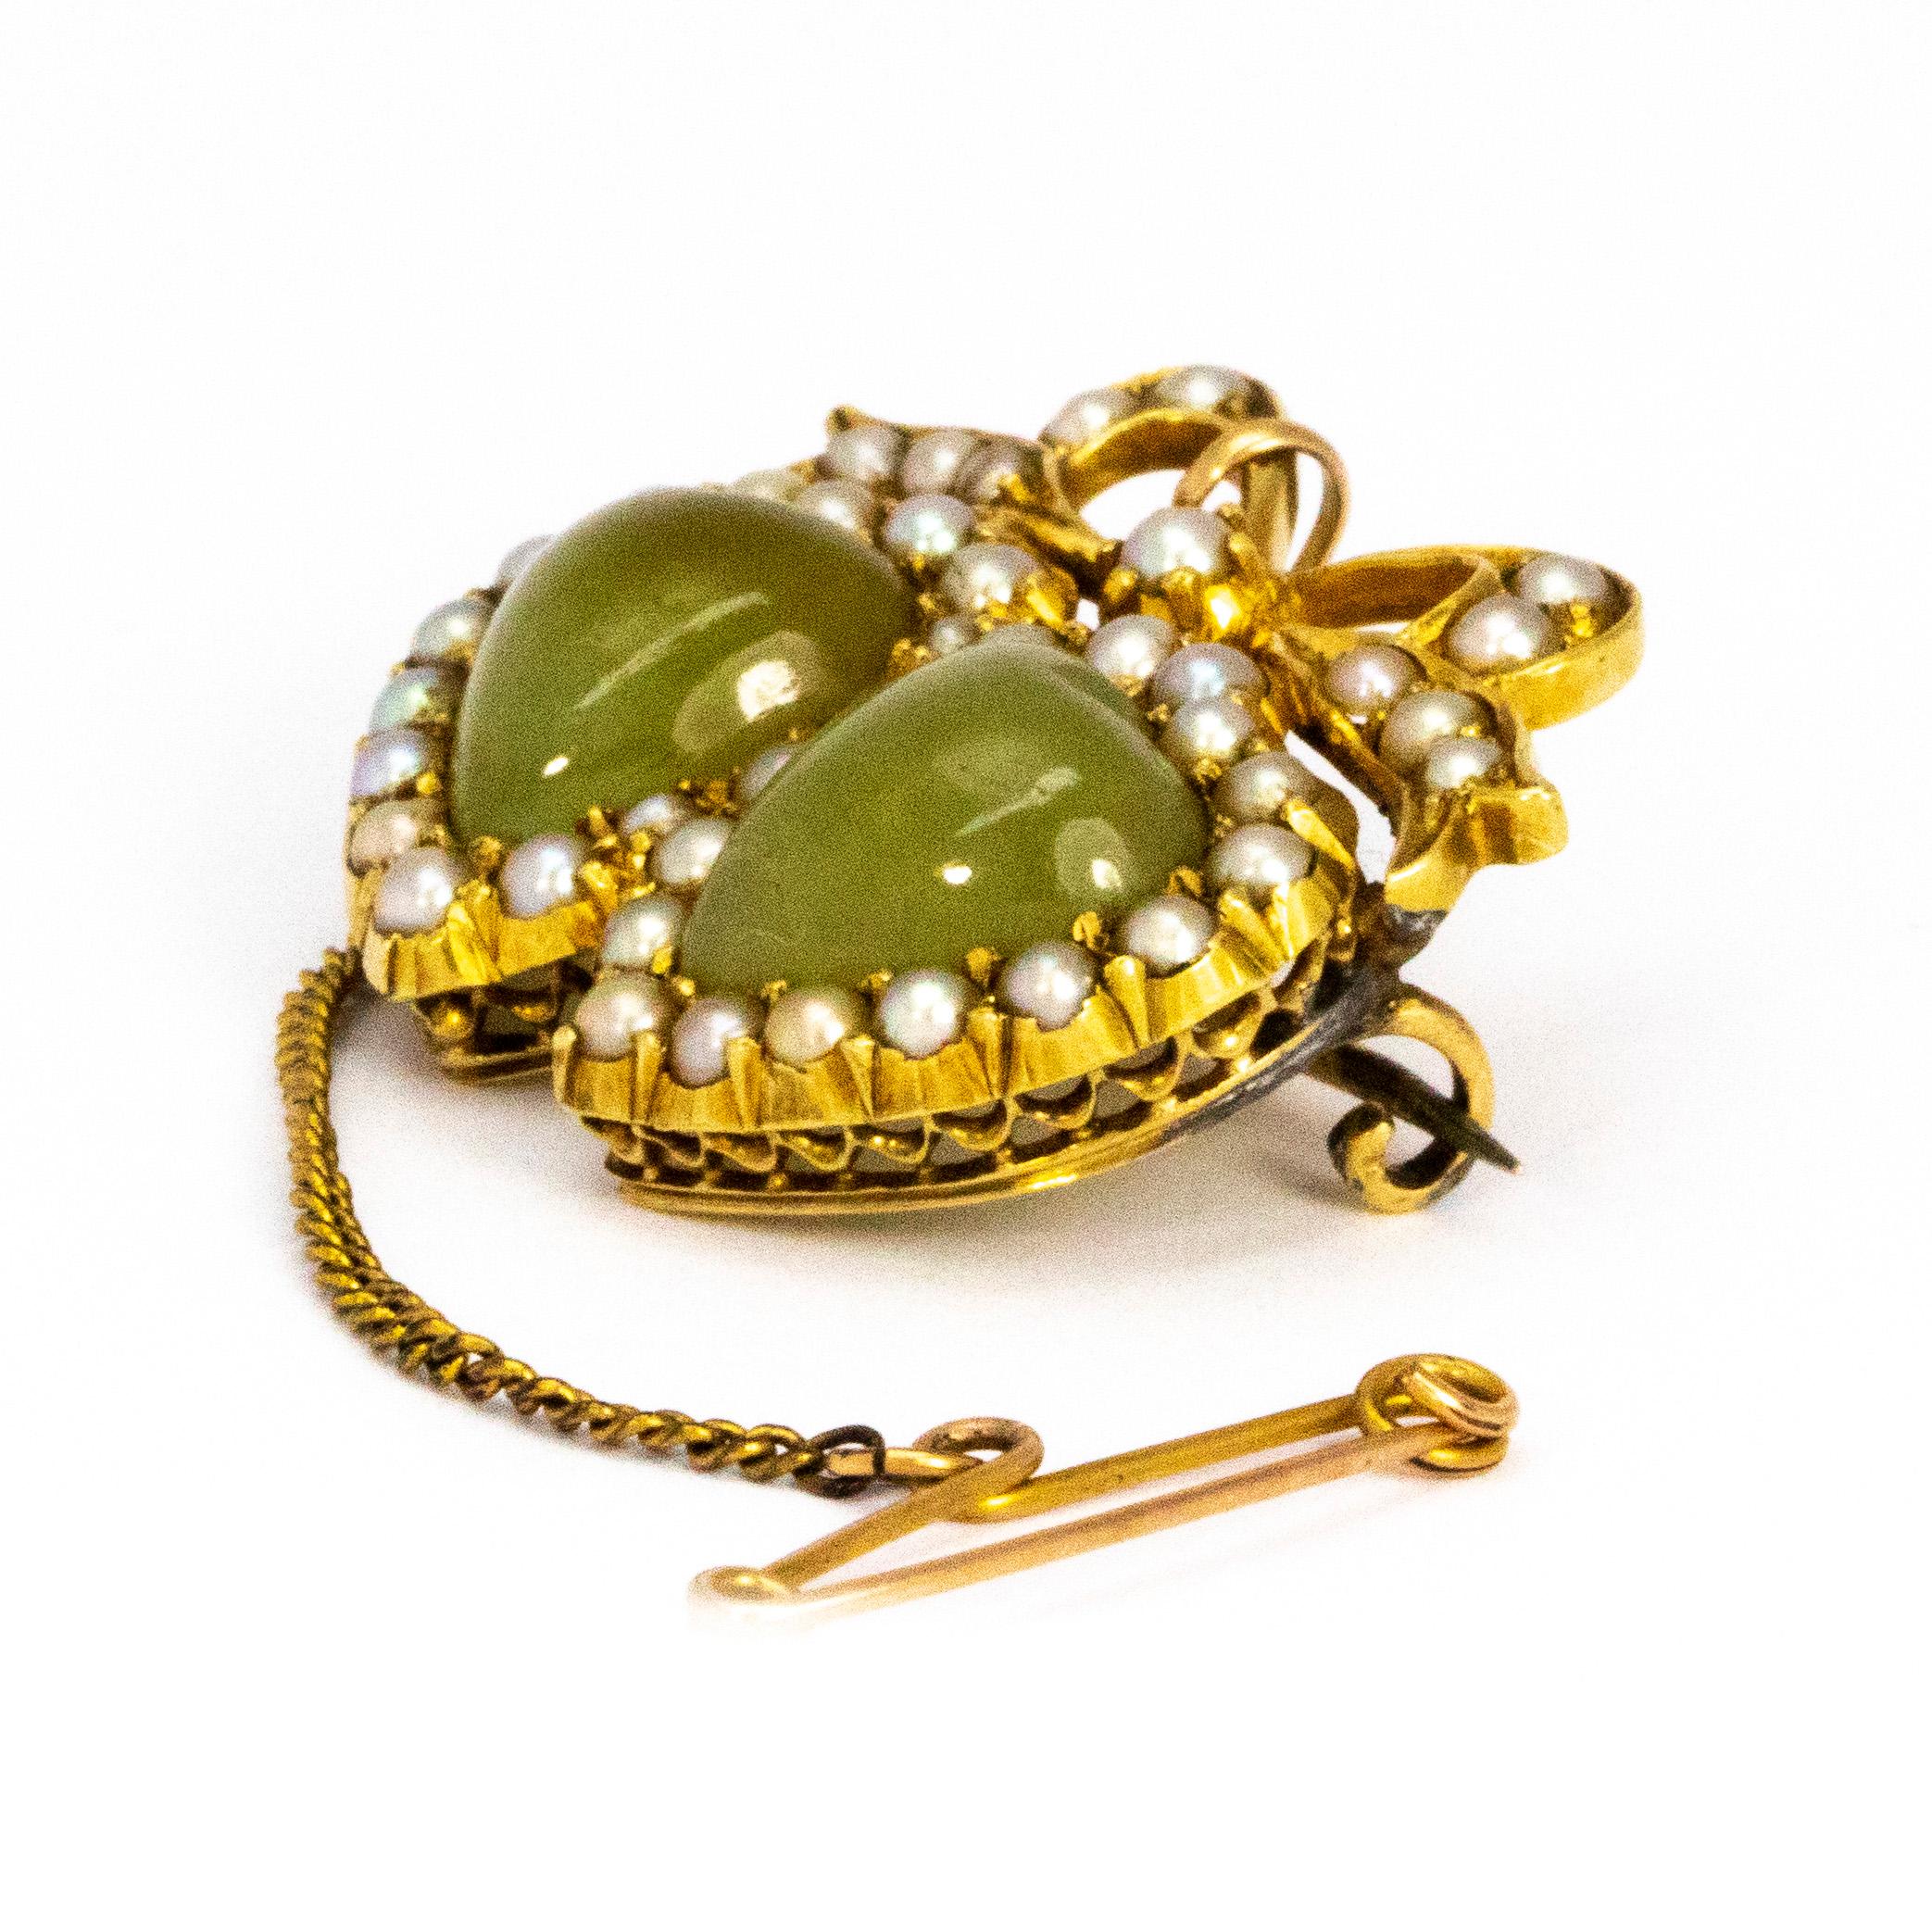 The two gorgeous glossy stones in this brooch are Chalcedony stones and are the most beautiful pale green colour. Surrounding the hearts are seed pearls and above the pearls carry on into bow detail. 

Dimensions: 26mm x 22mm 